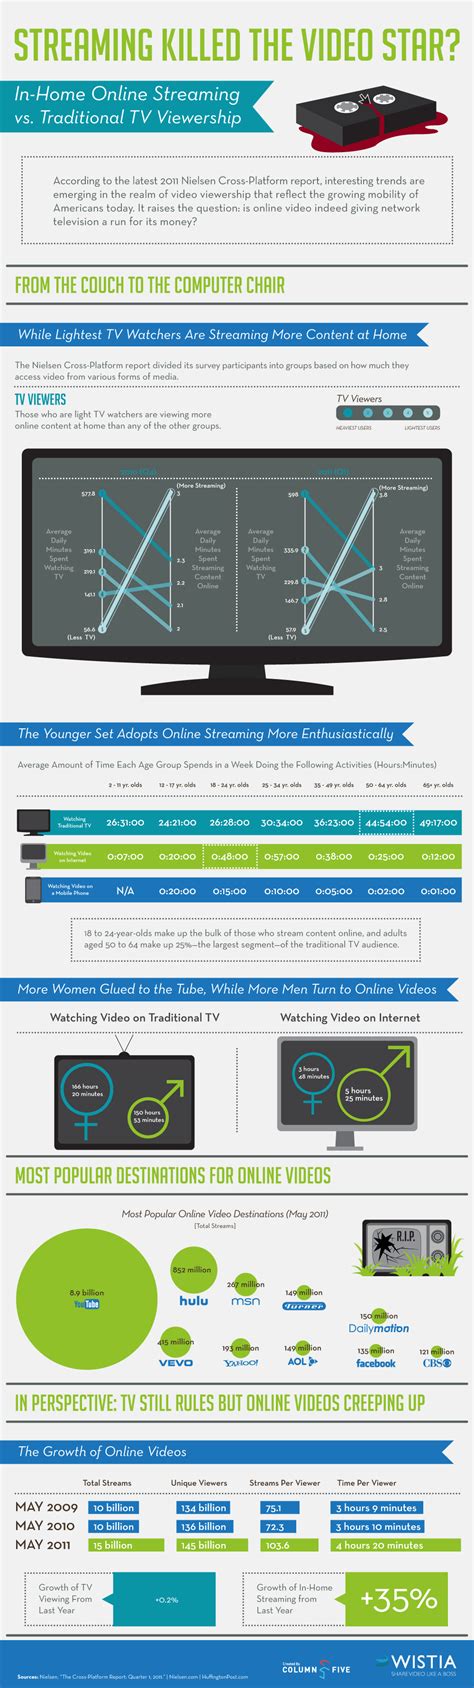 streaming killed the video star daily infographic